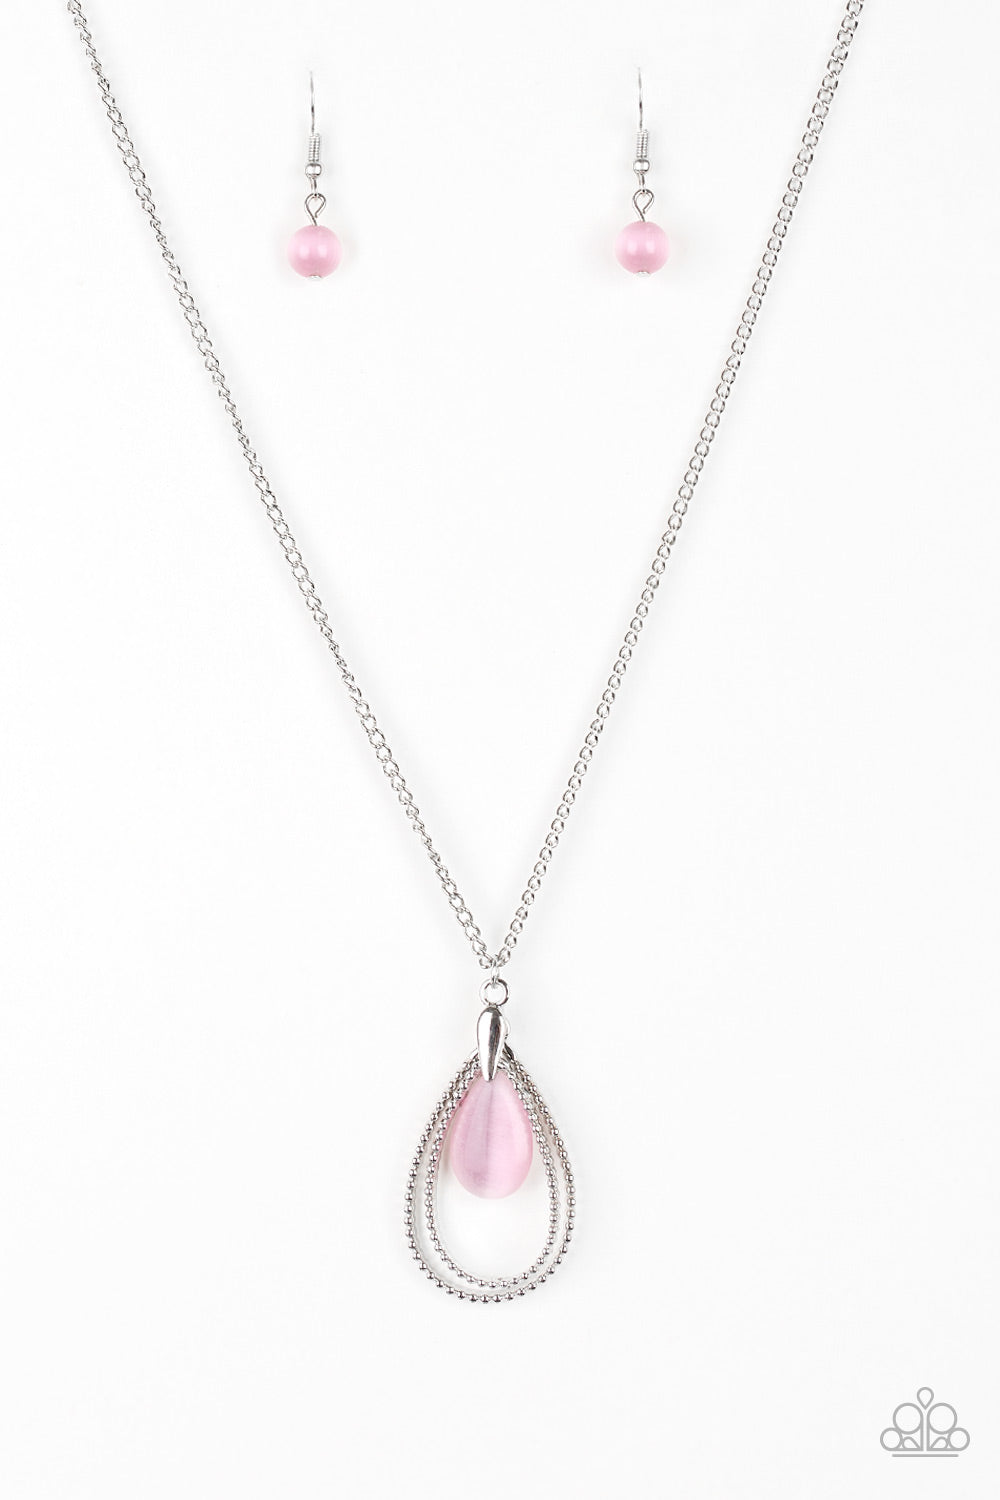 Teardrop Tranquility Pink Paparazzi Necklace Cashmere Pink Jewels - Cashmere Pink Jewels & Accessories, Cashmere Pink Jewels & Accessories - Paparazzi